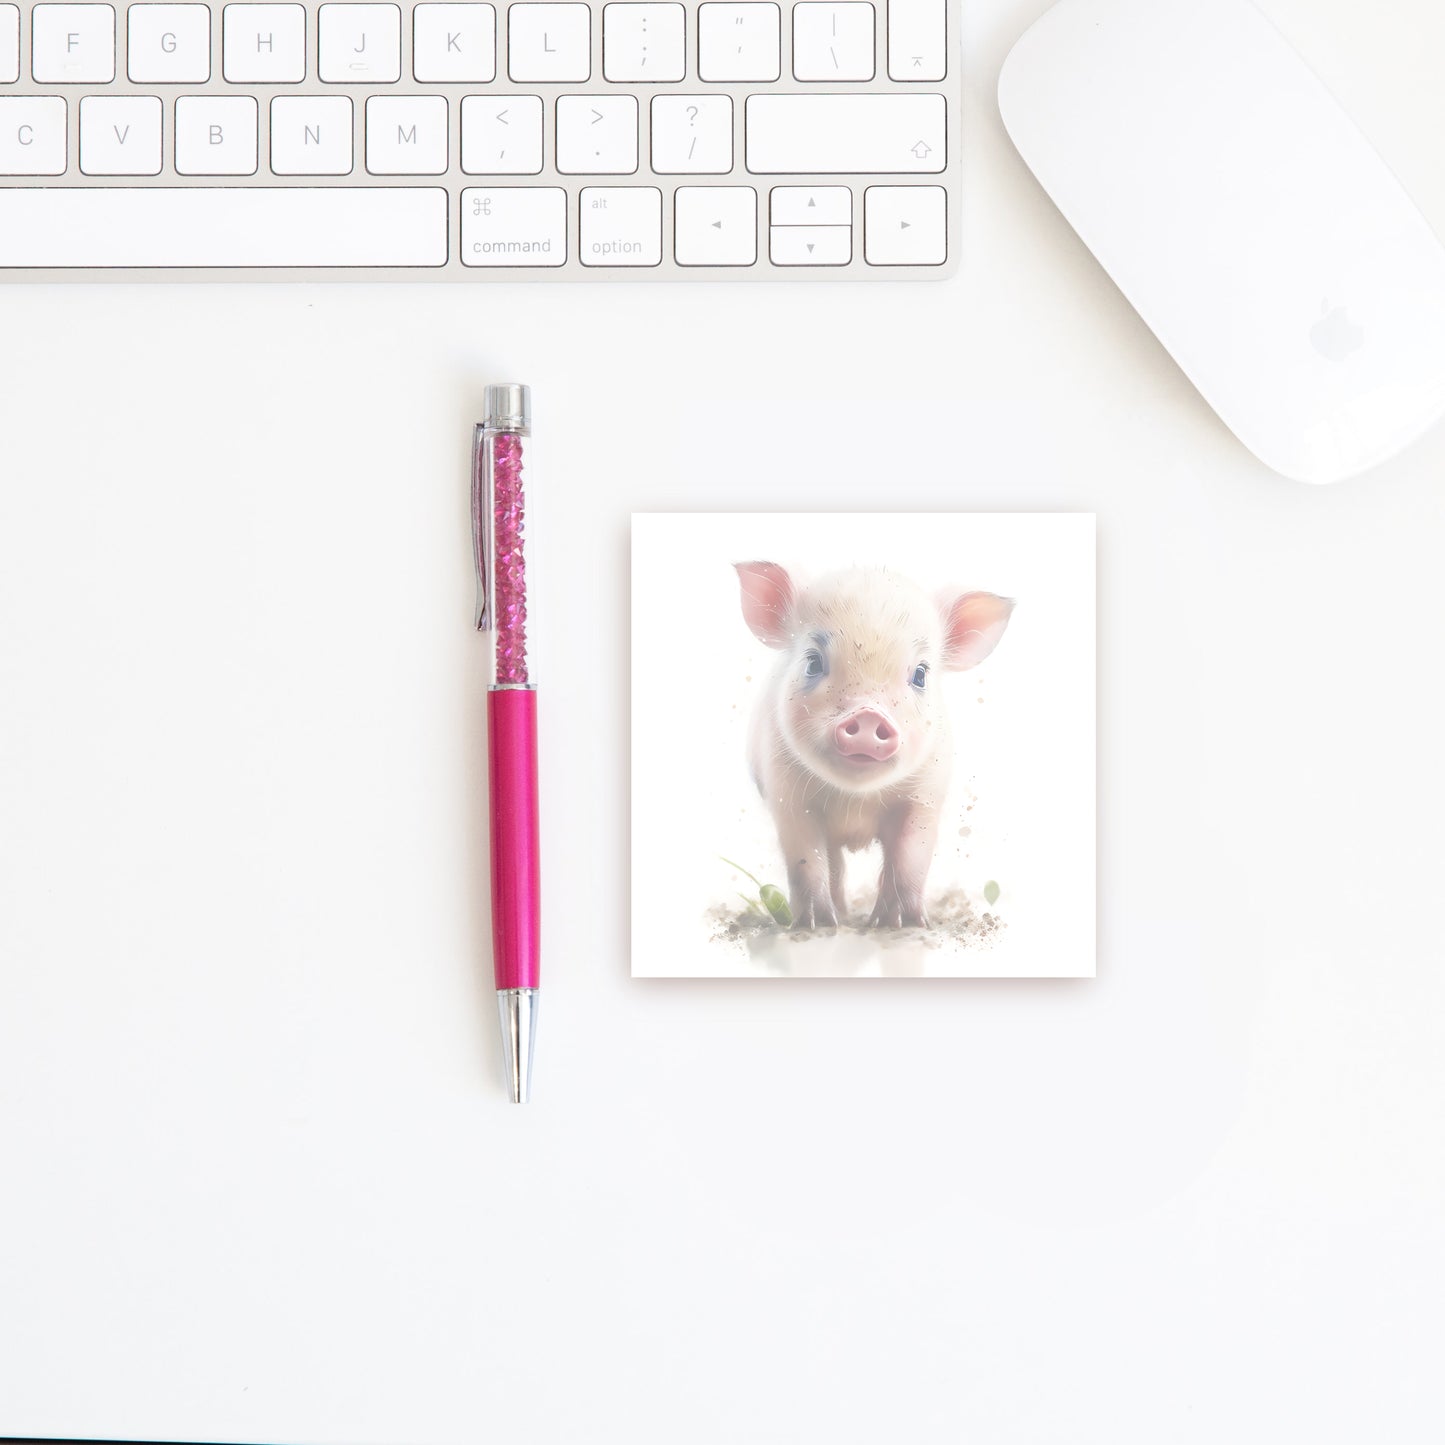 STICKY NOTE PAD - CUTE PINK PIG